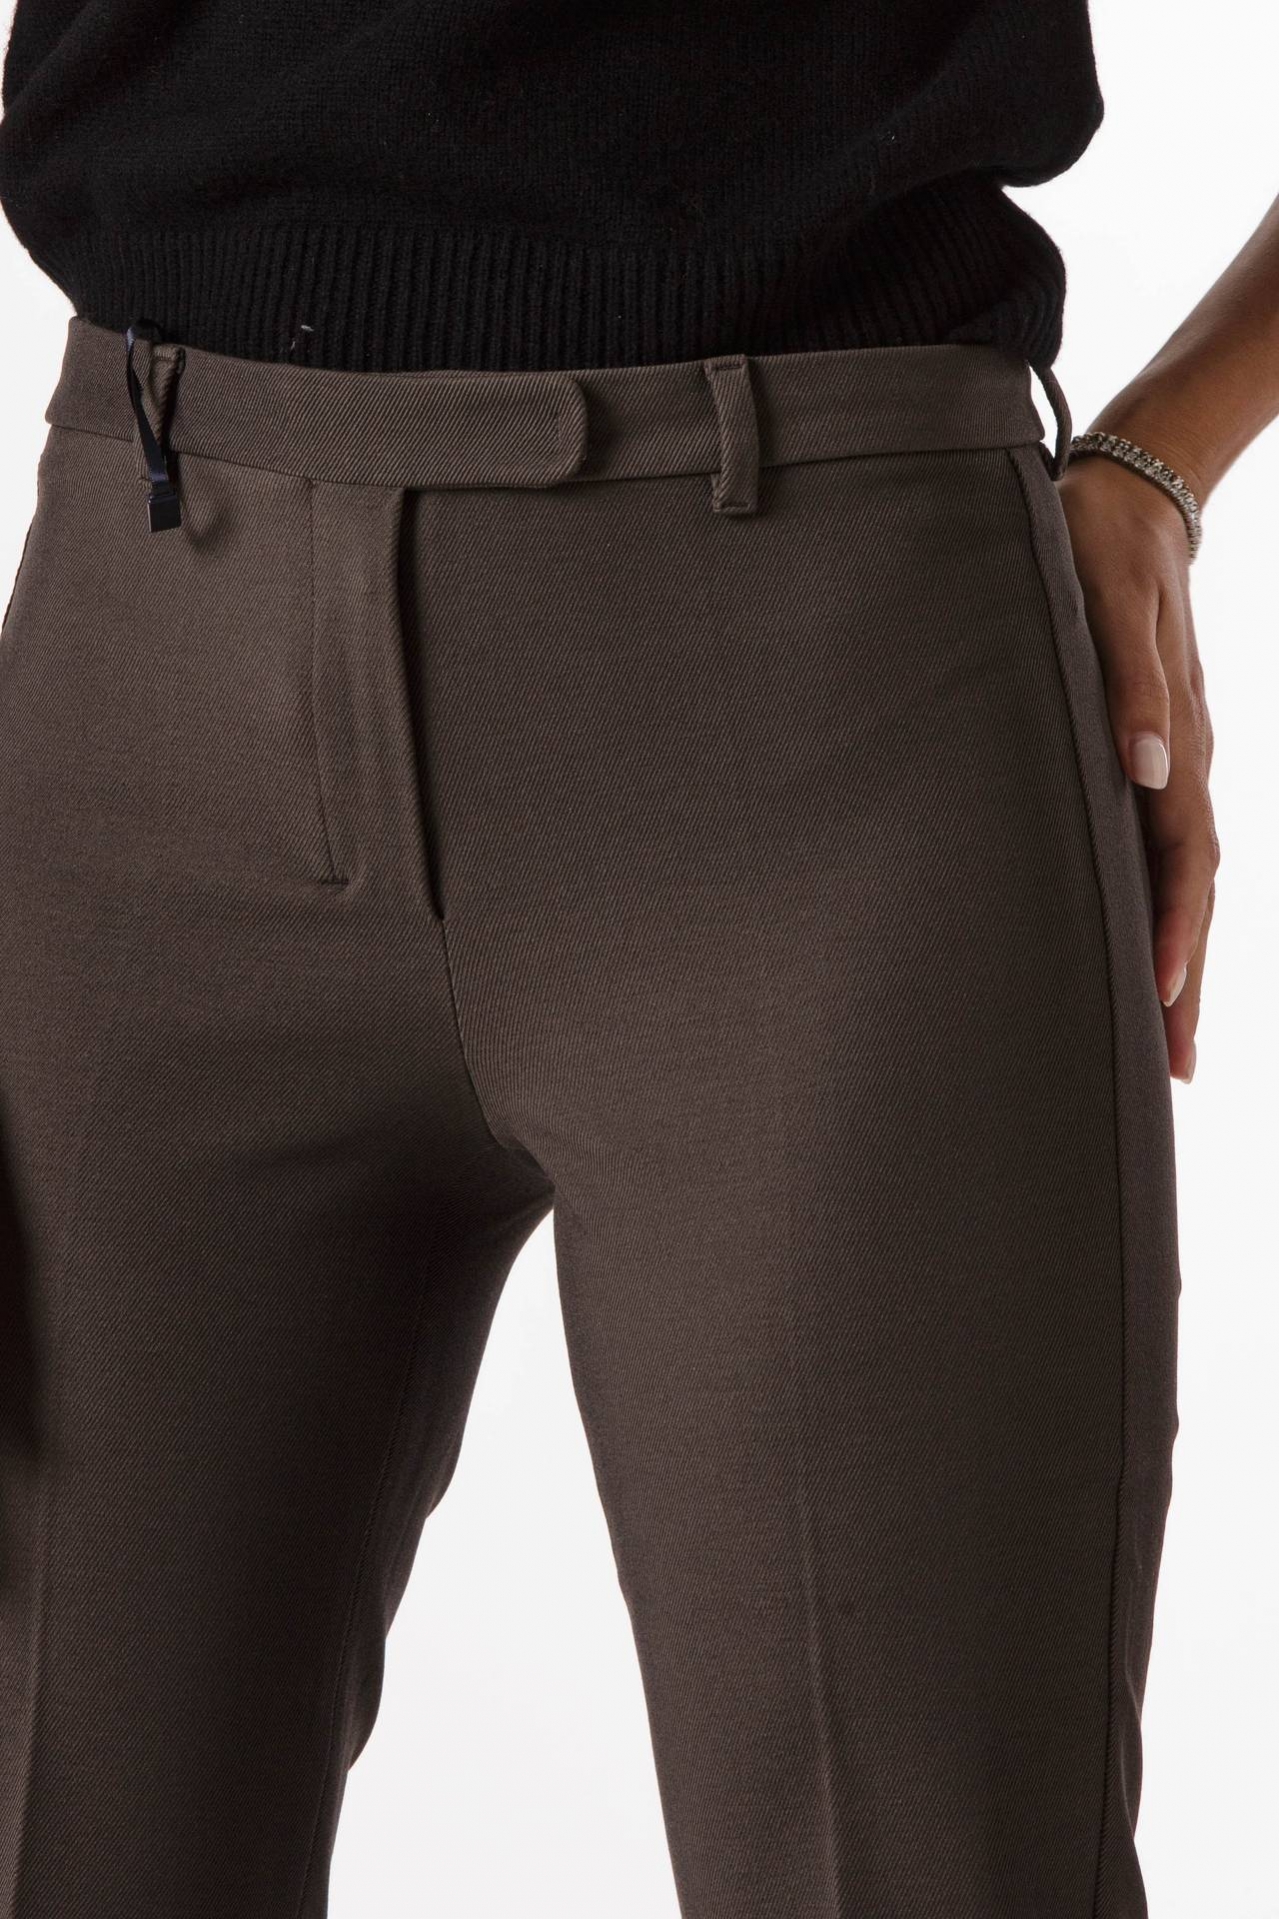 HUMANITY stretch trousers